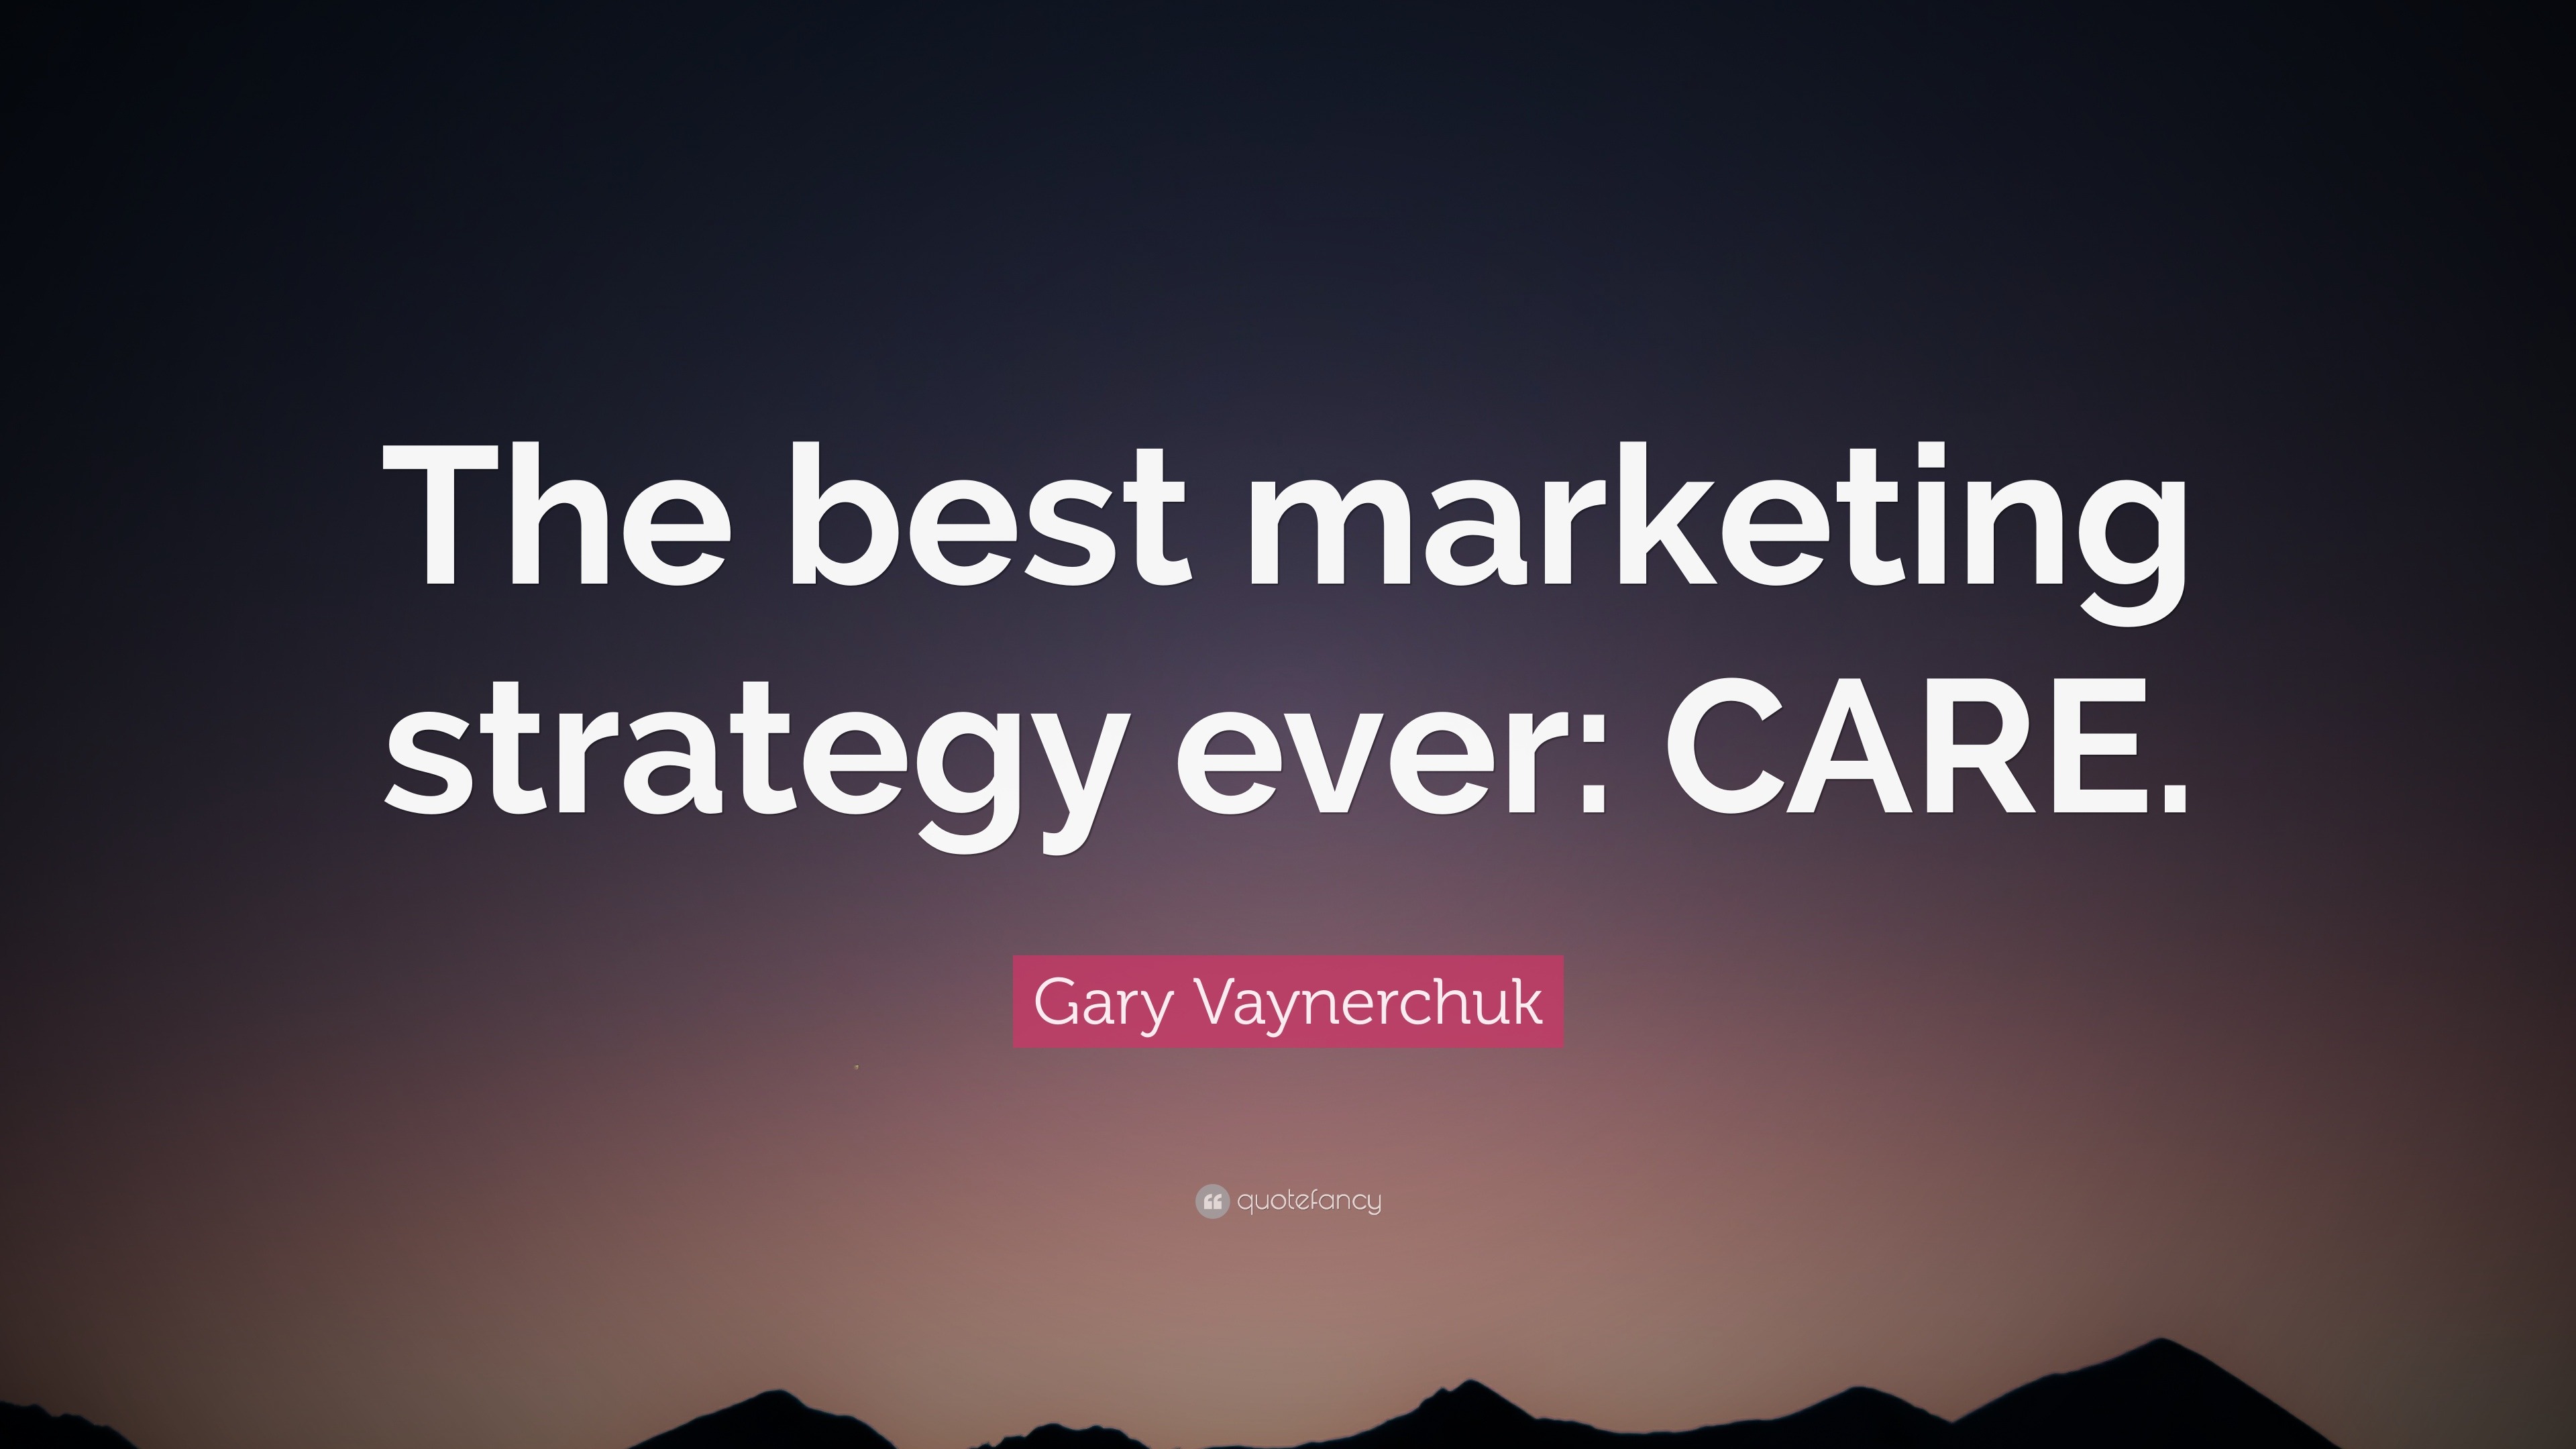 Gary Vaynerchuk Quote “The best marketing strategy ever